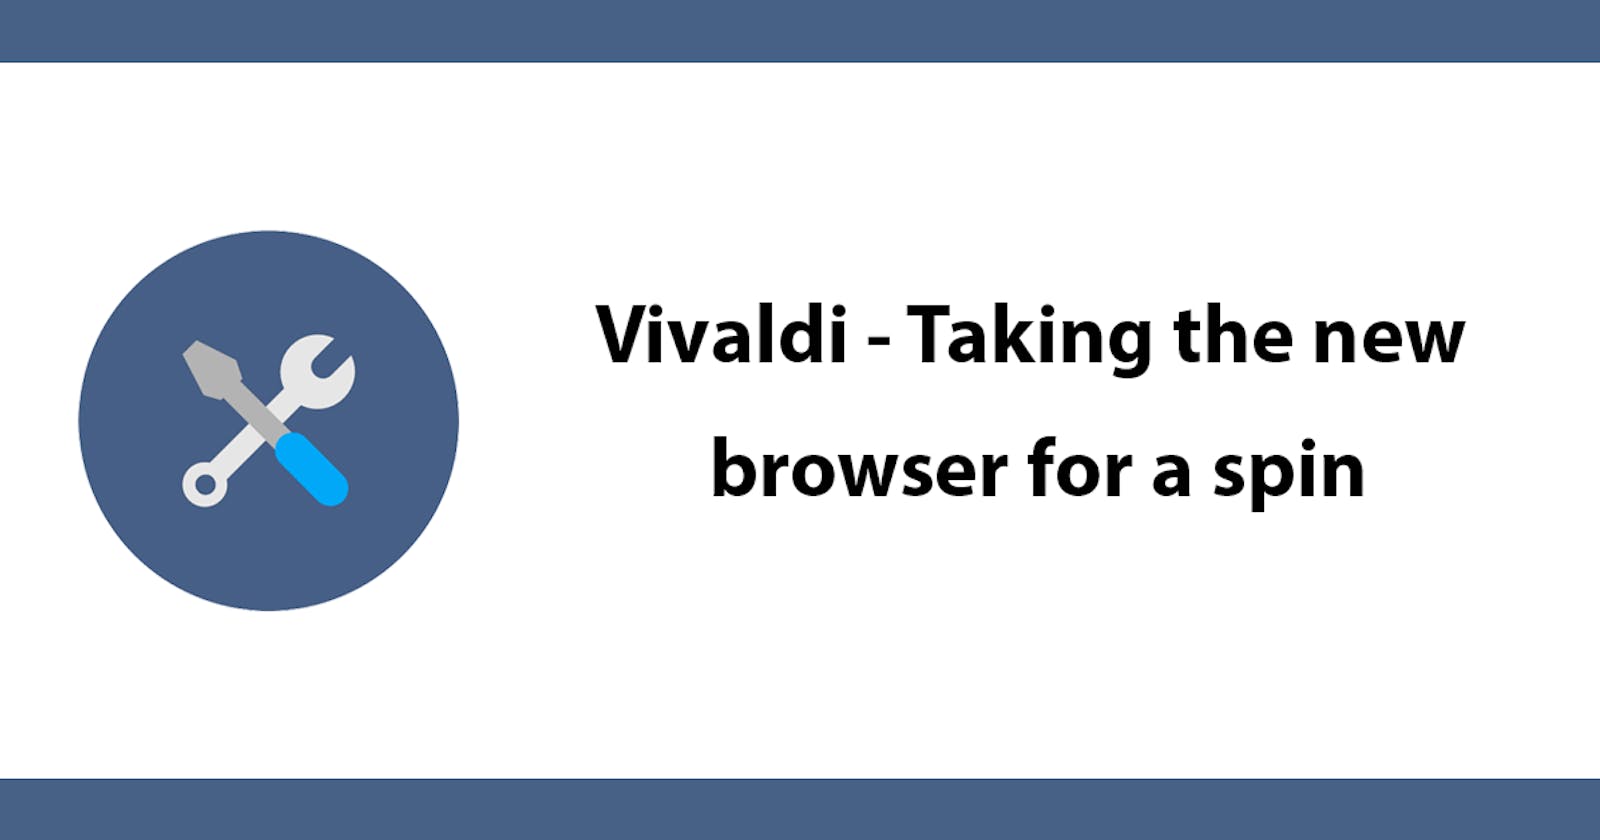 Vivaldi - Taking the new browser for a spin